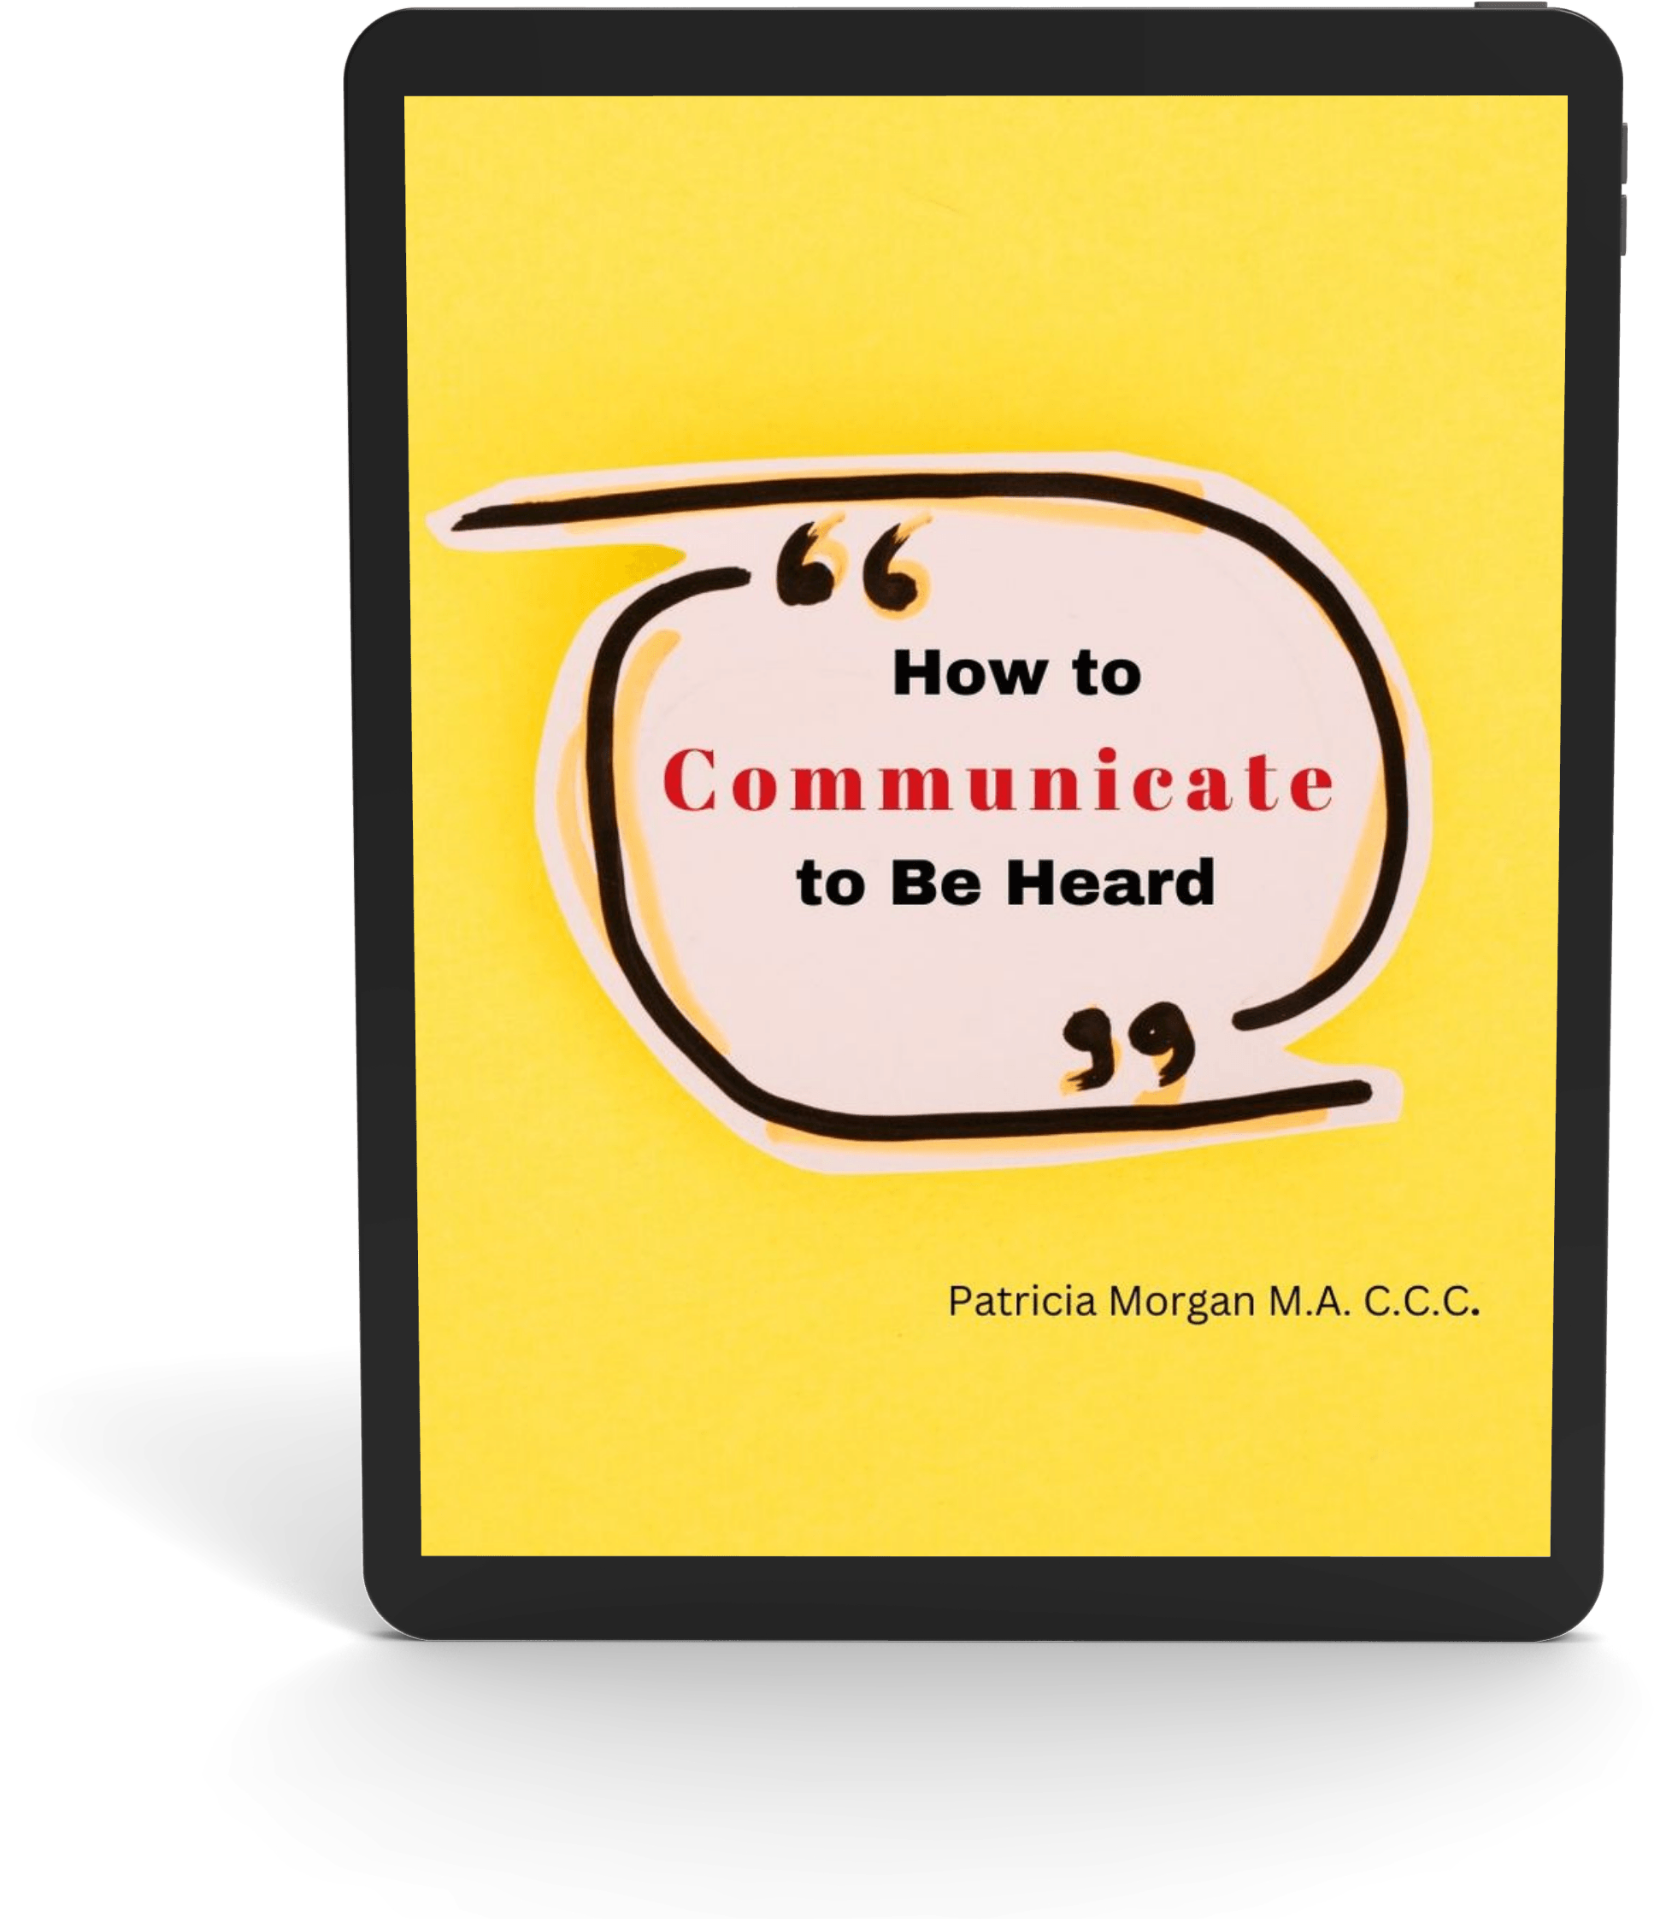 How to Communicate to Be Heard